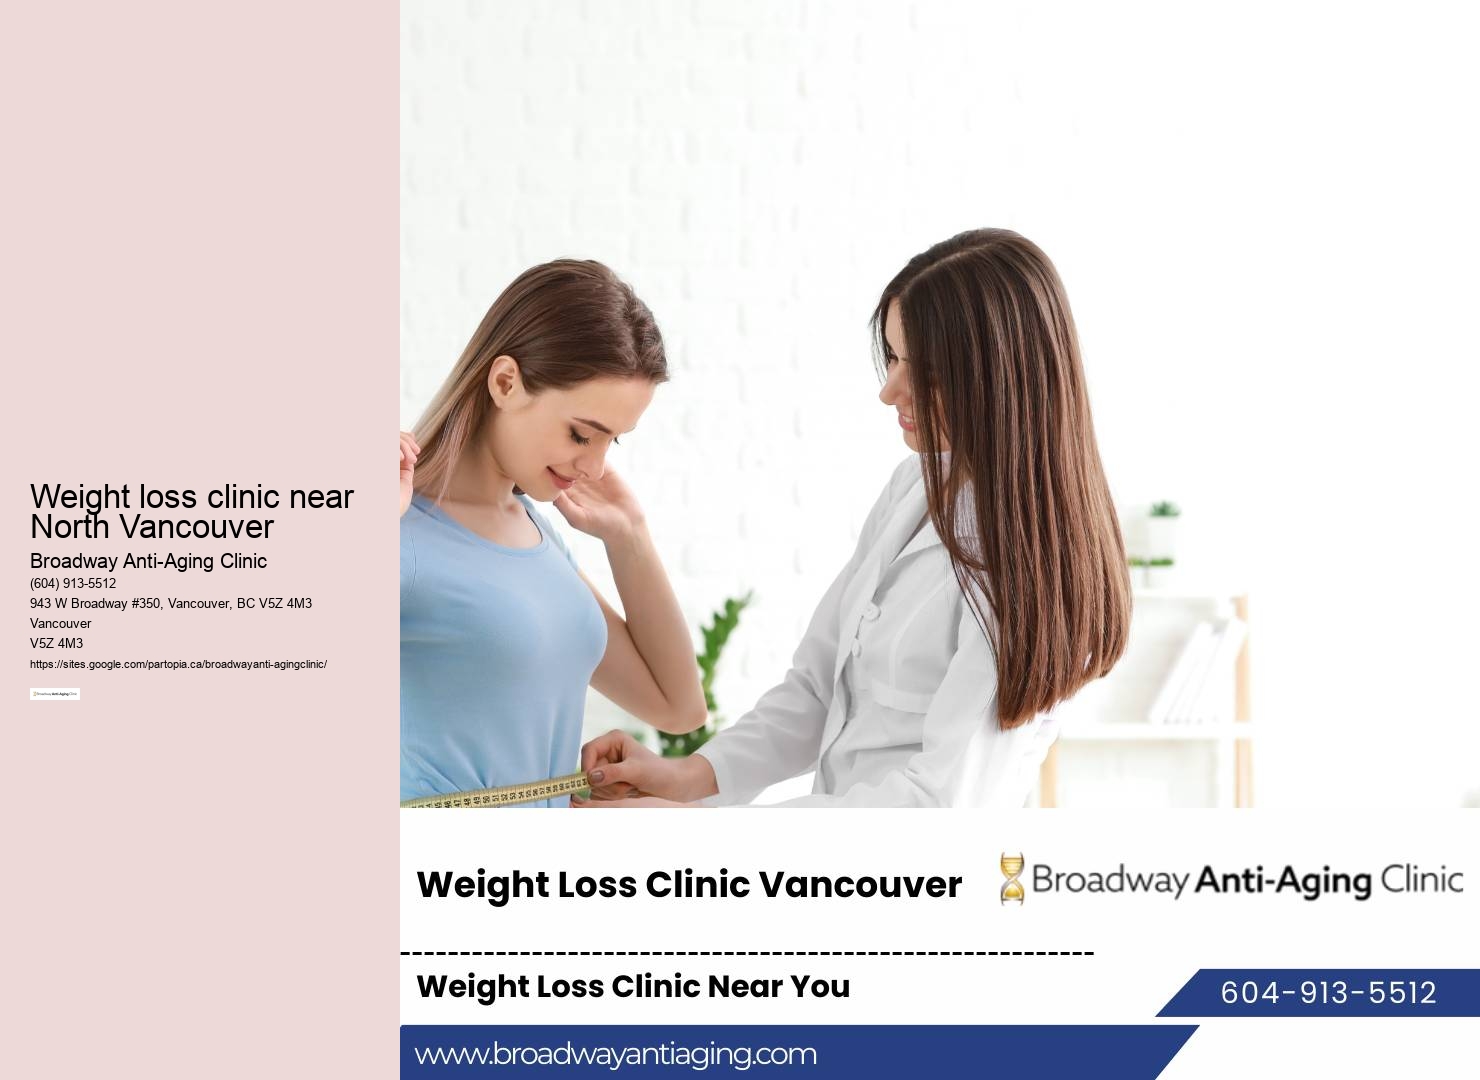 Weight loss clinic near North Vancouver